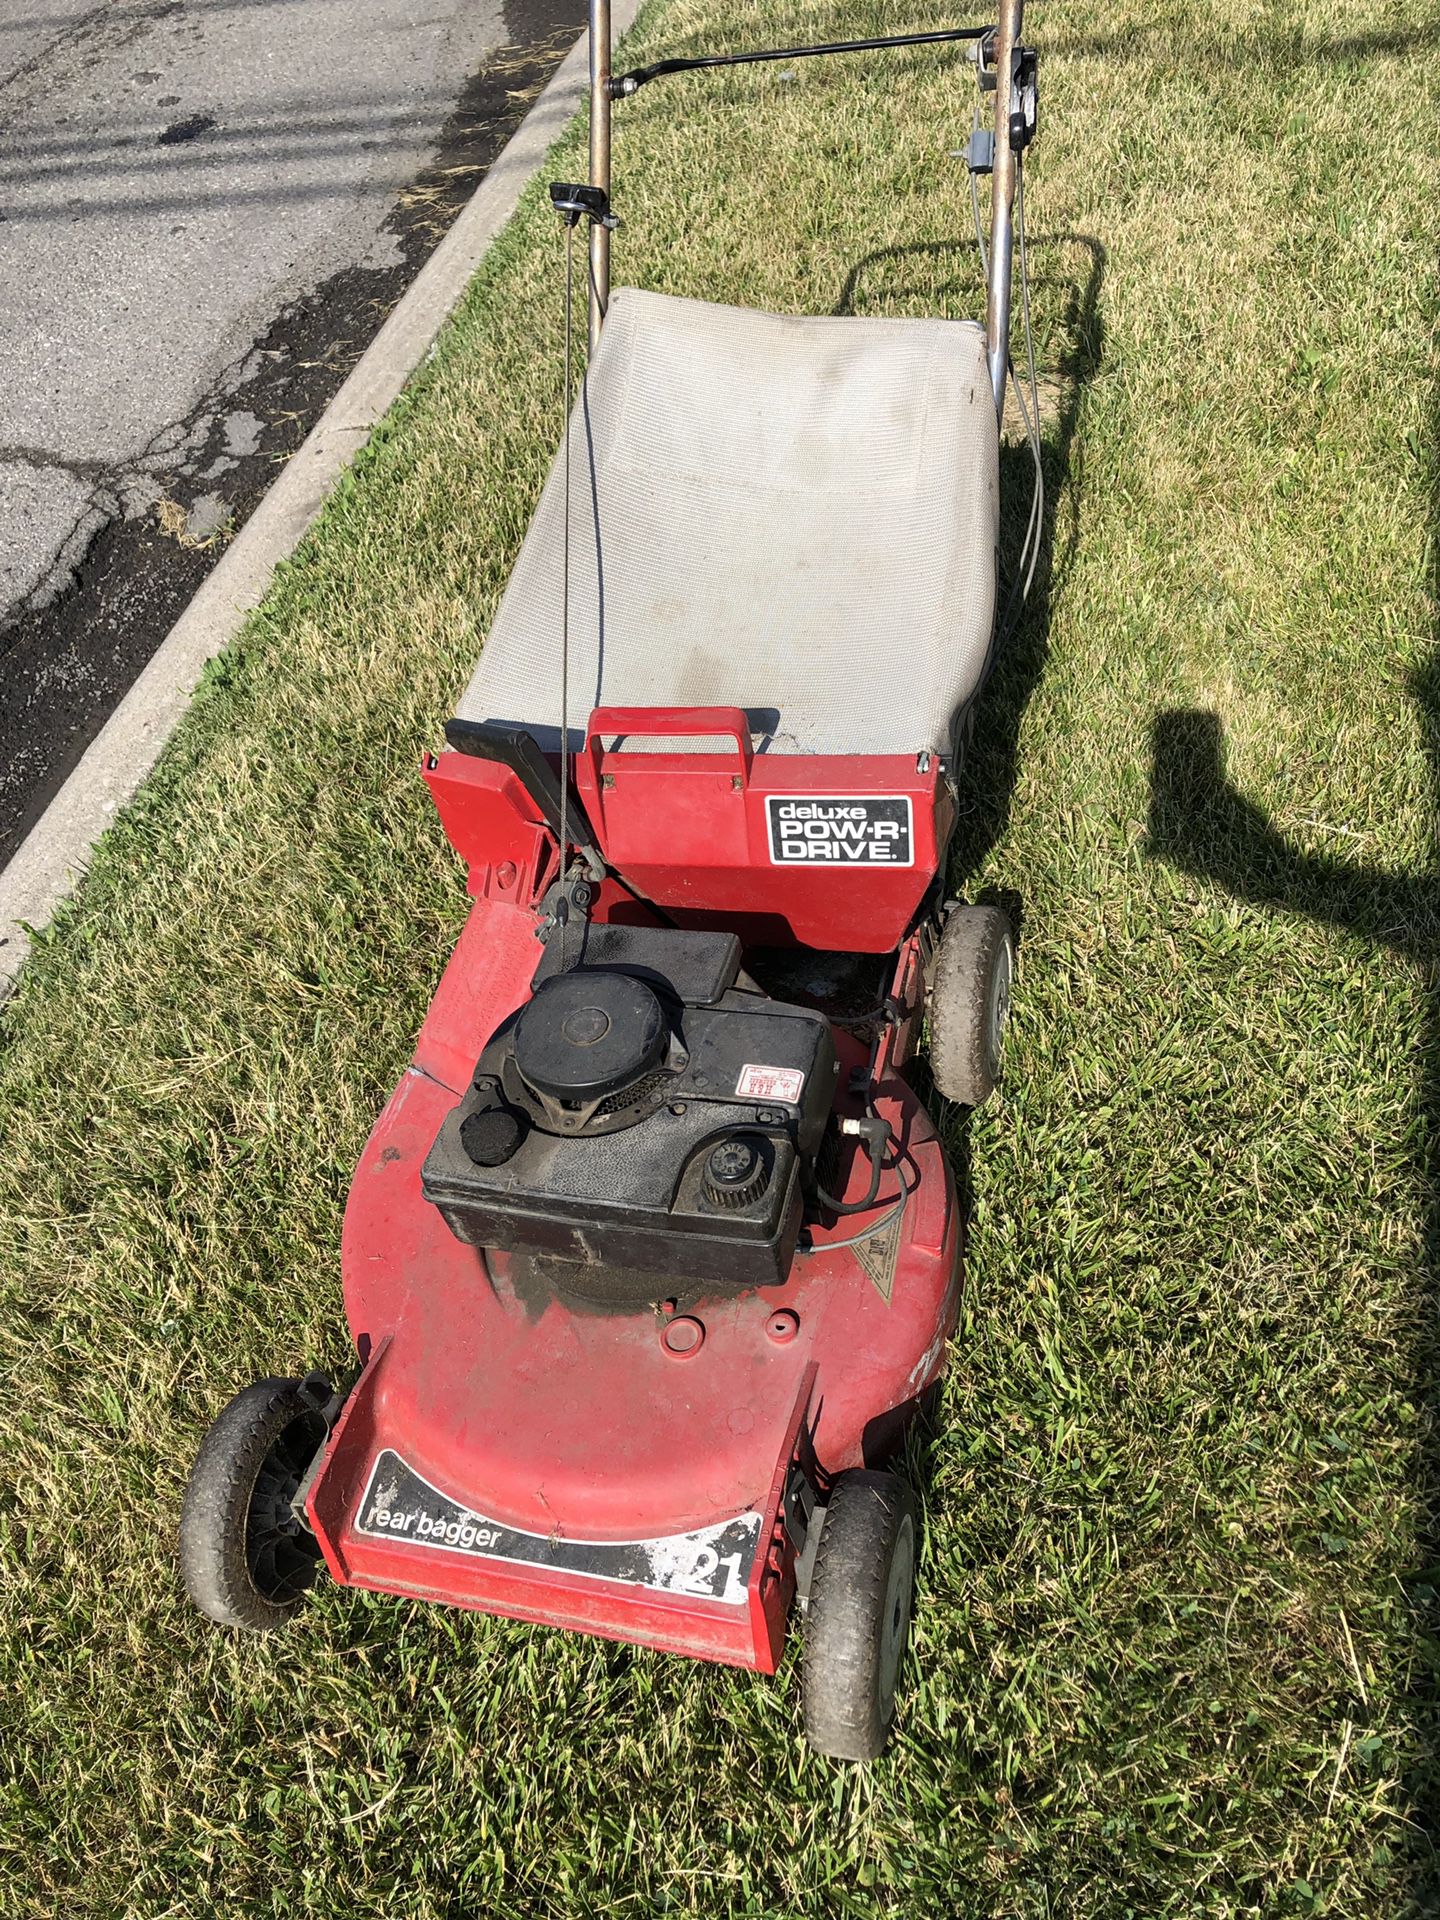 Lawn mower With Large Bag, Starts Right Up first pull